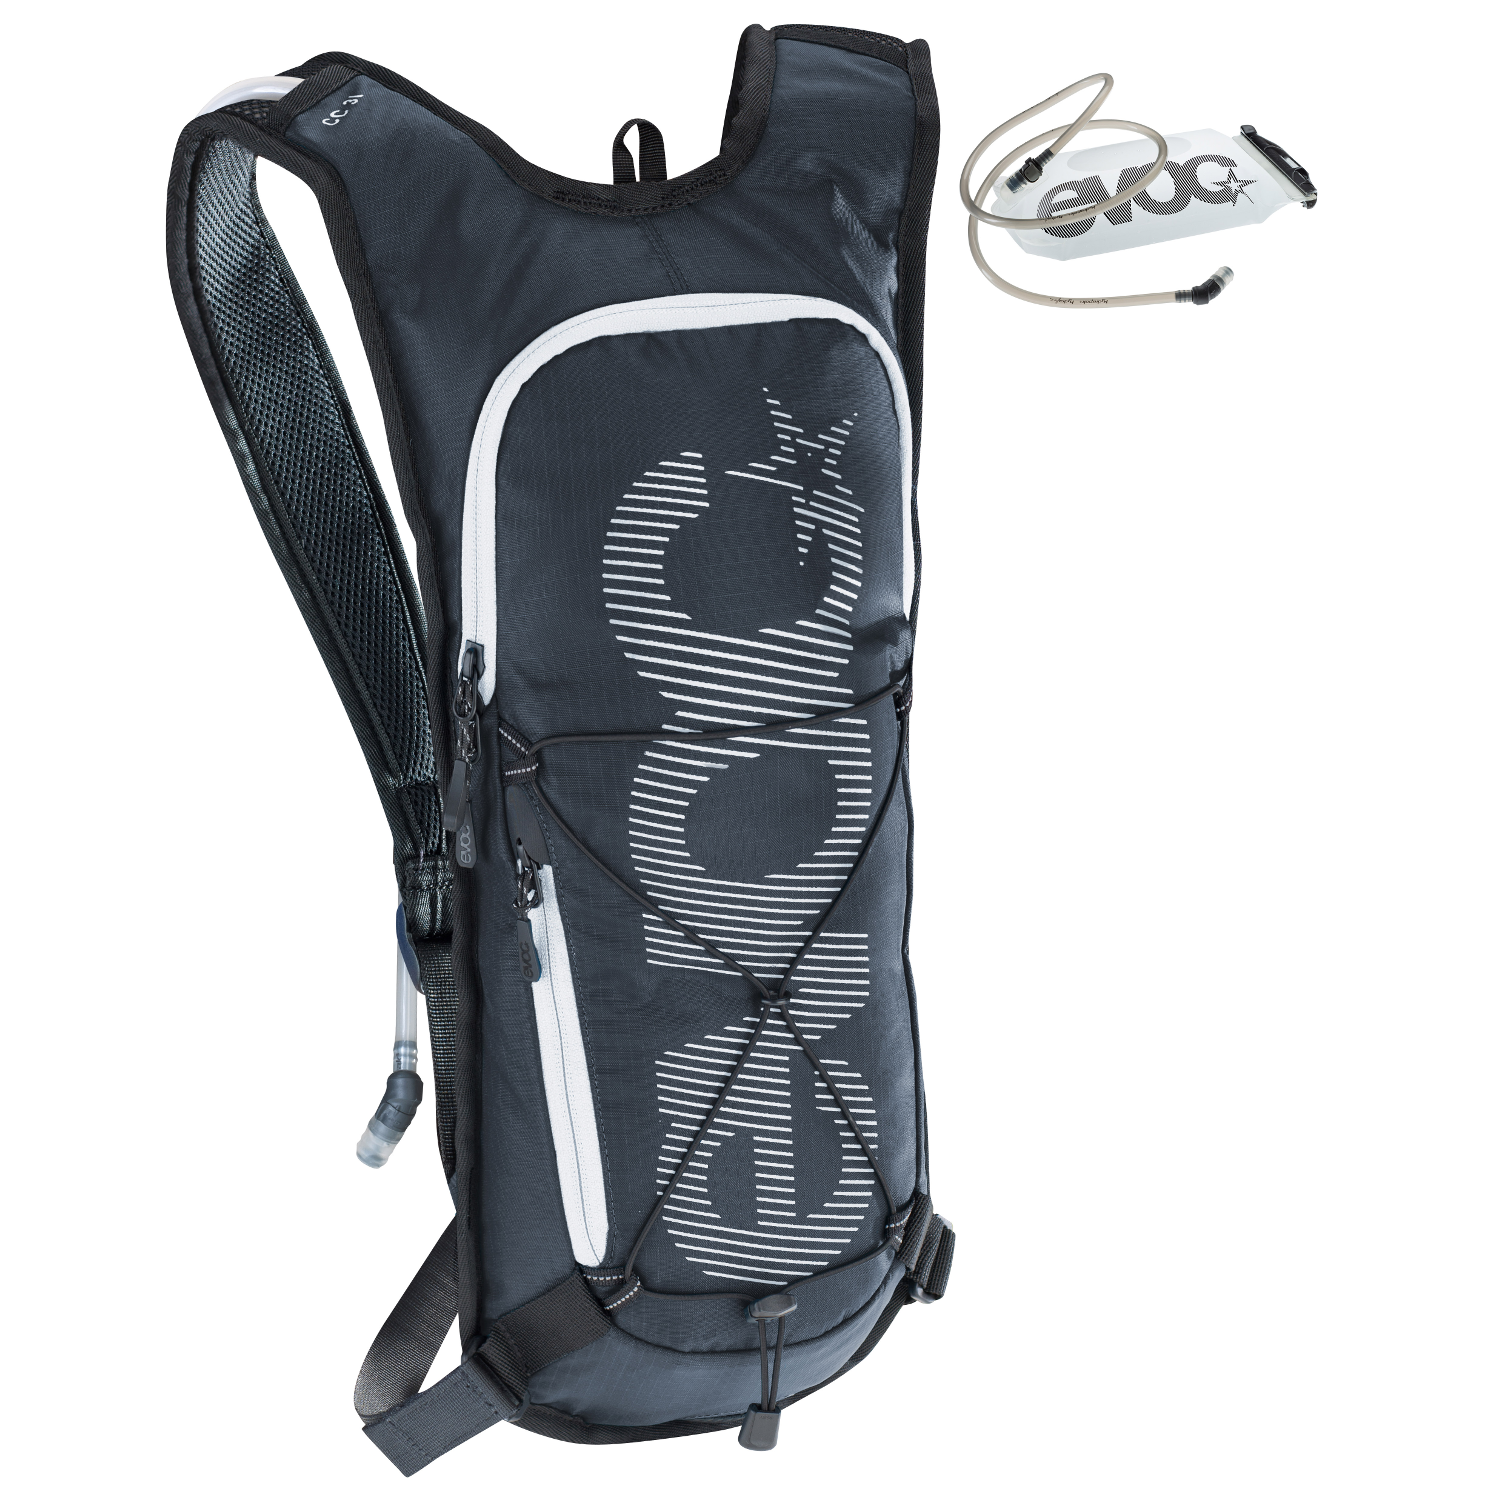 Evoc Backpack with Hydration System Cross Country Black, 3 Liter